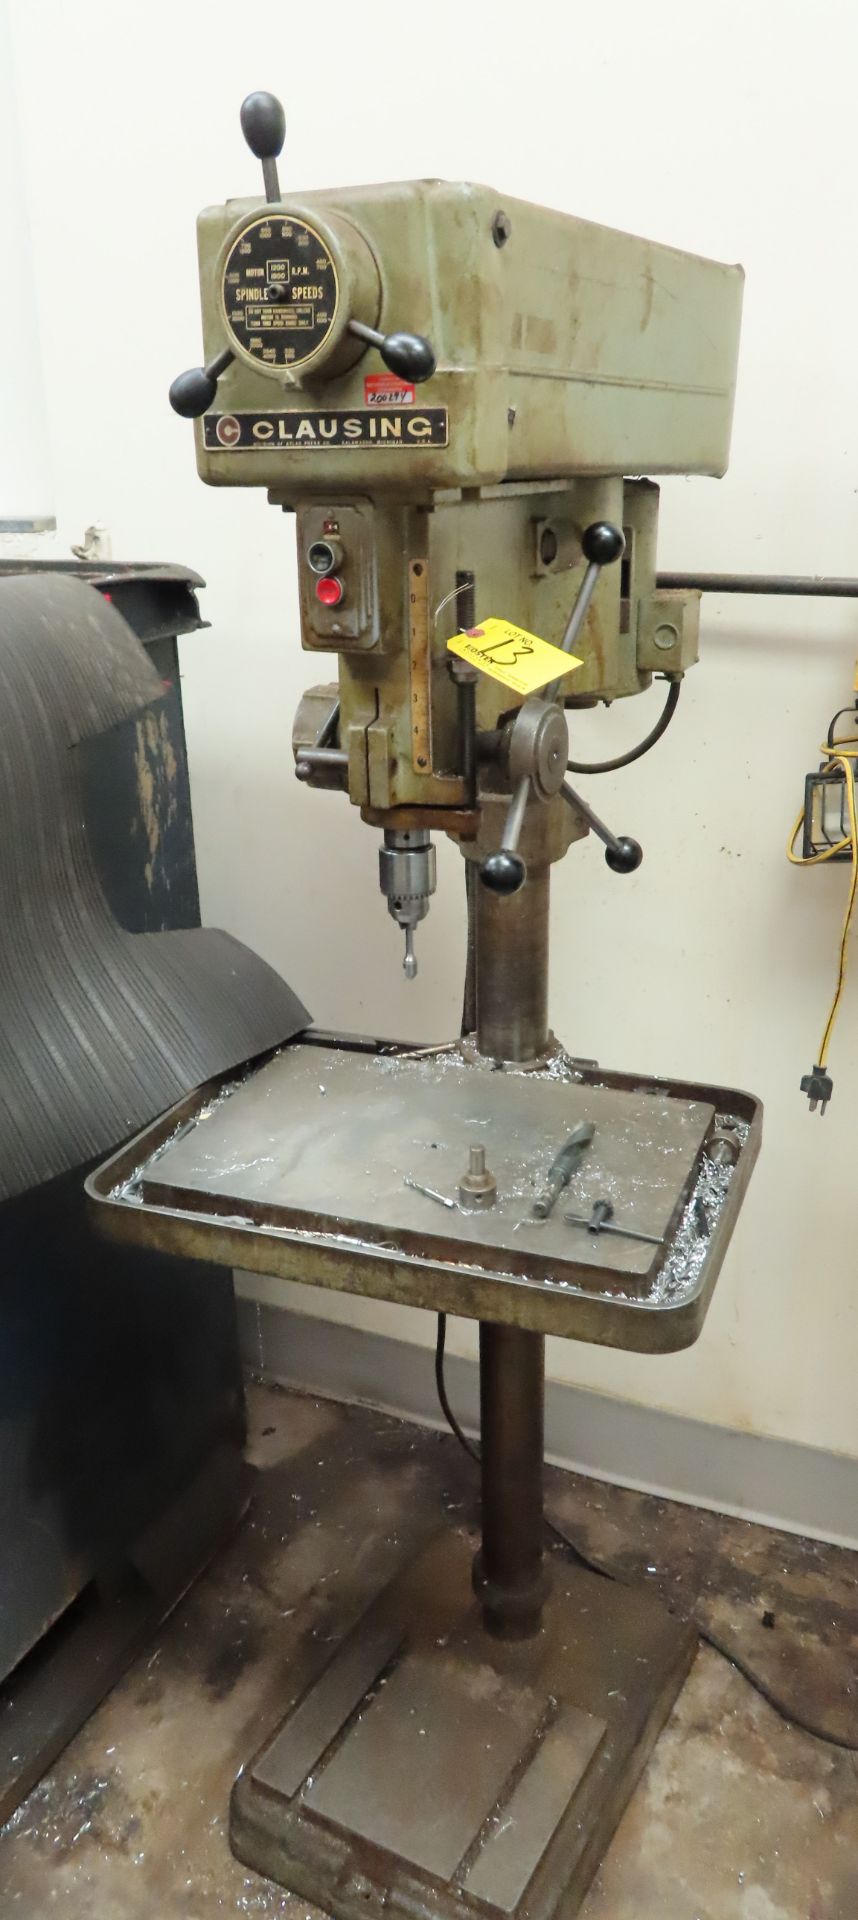 CLAUSING MDL. 1764 17" FLOOR TYPE DRILL PRESS, 330-4000 RPM, 12" X 18" WORK AREA, S/N: 512236